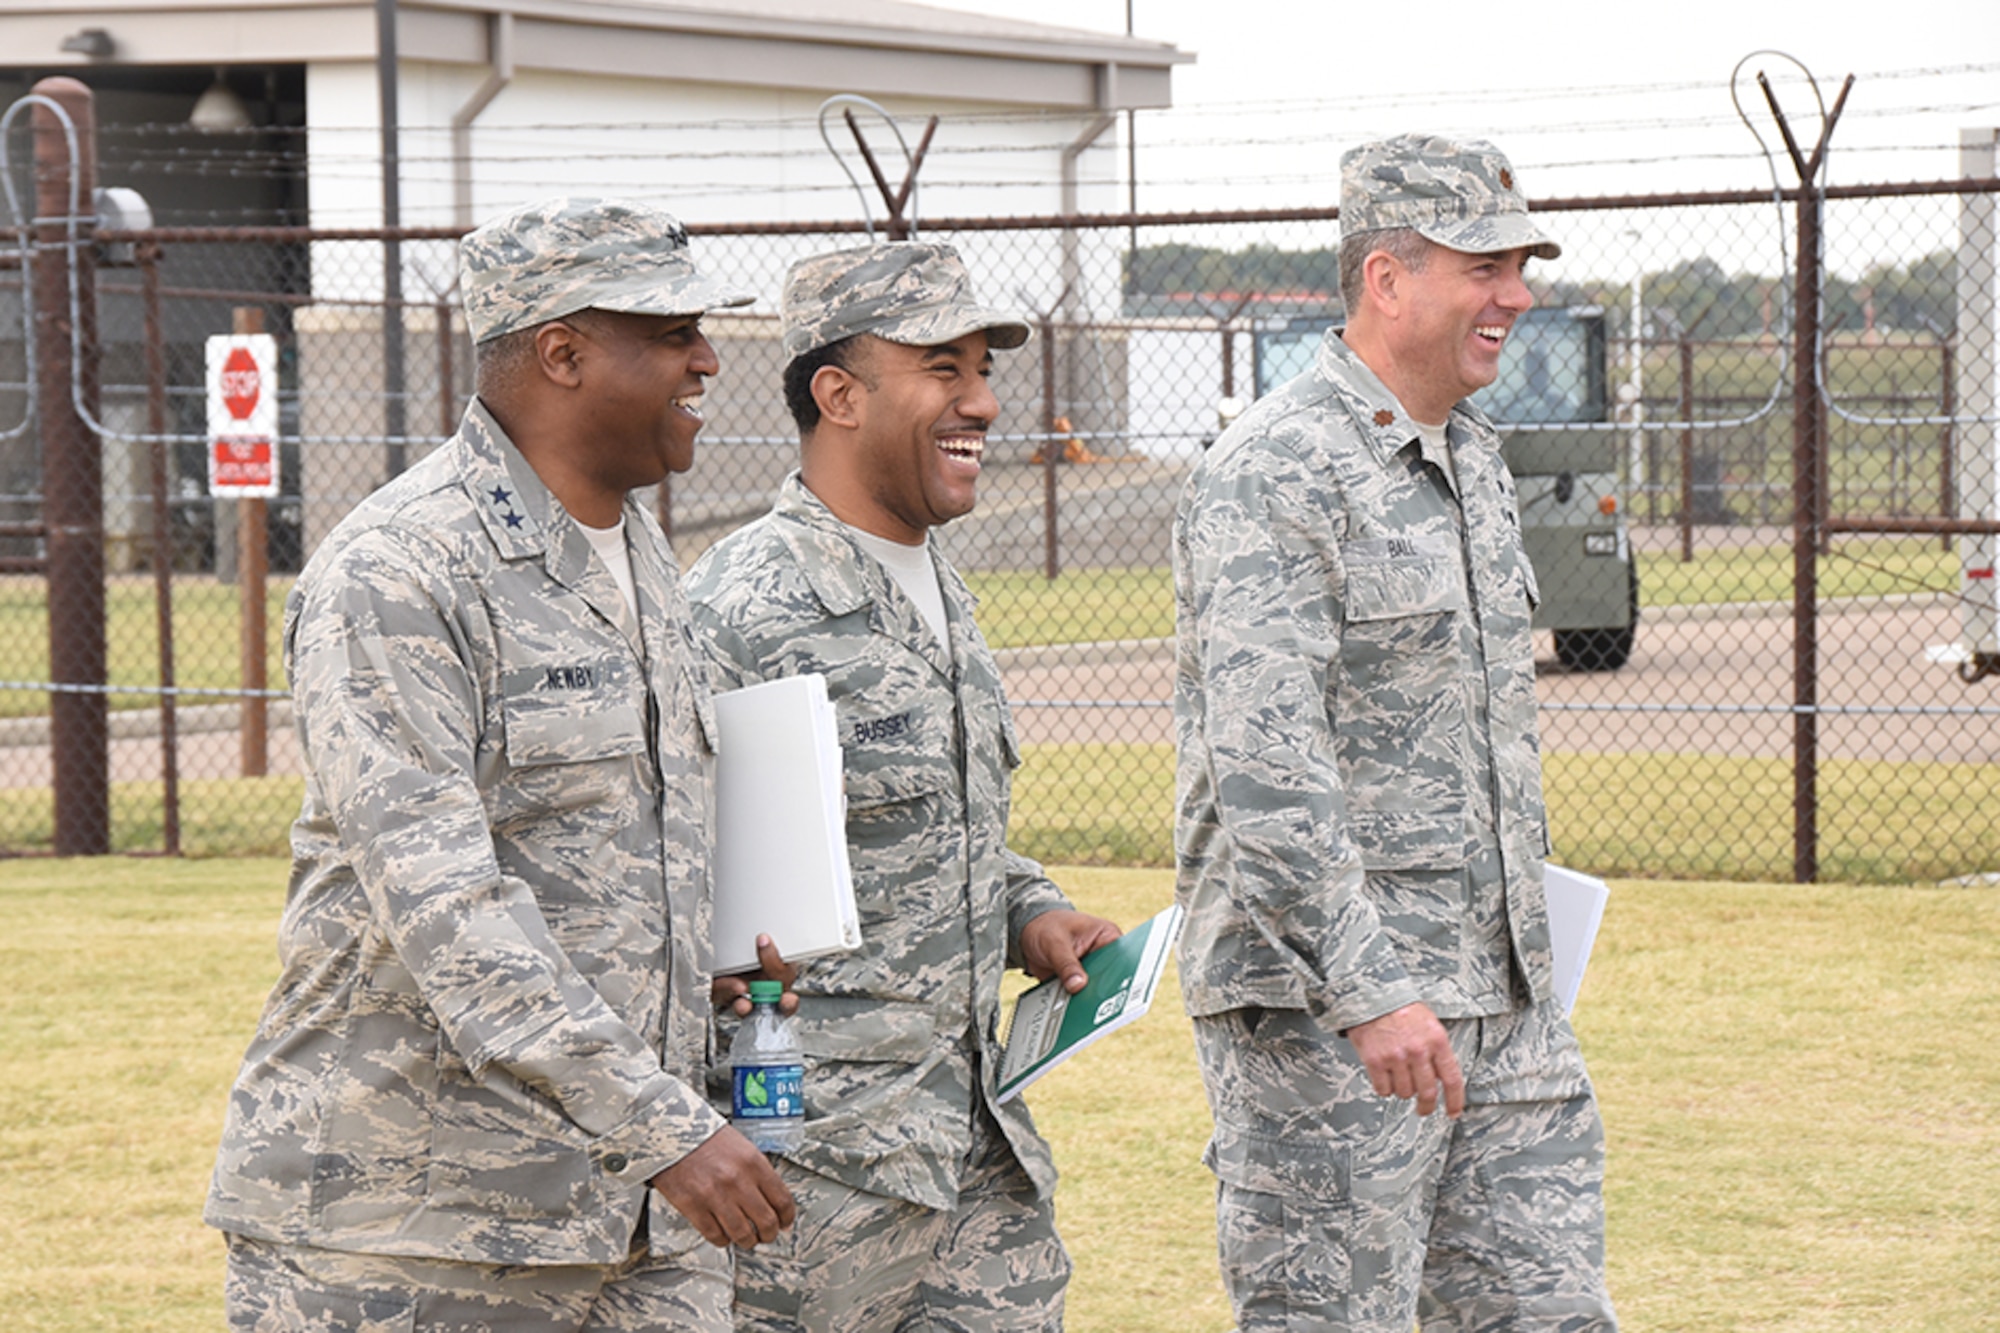 Major General Brian Newby Walks with SrA Leon Bussey and Major Bradley Ball at the 164th Airlift Wing in Memphis, TN Nov. 5 2016. Maj. Gen.  Newby  visited the 164th Airlift Wing to check on how the JAG office is Performing.